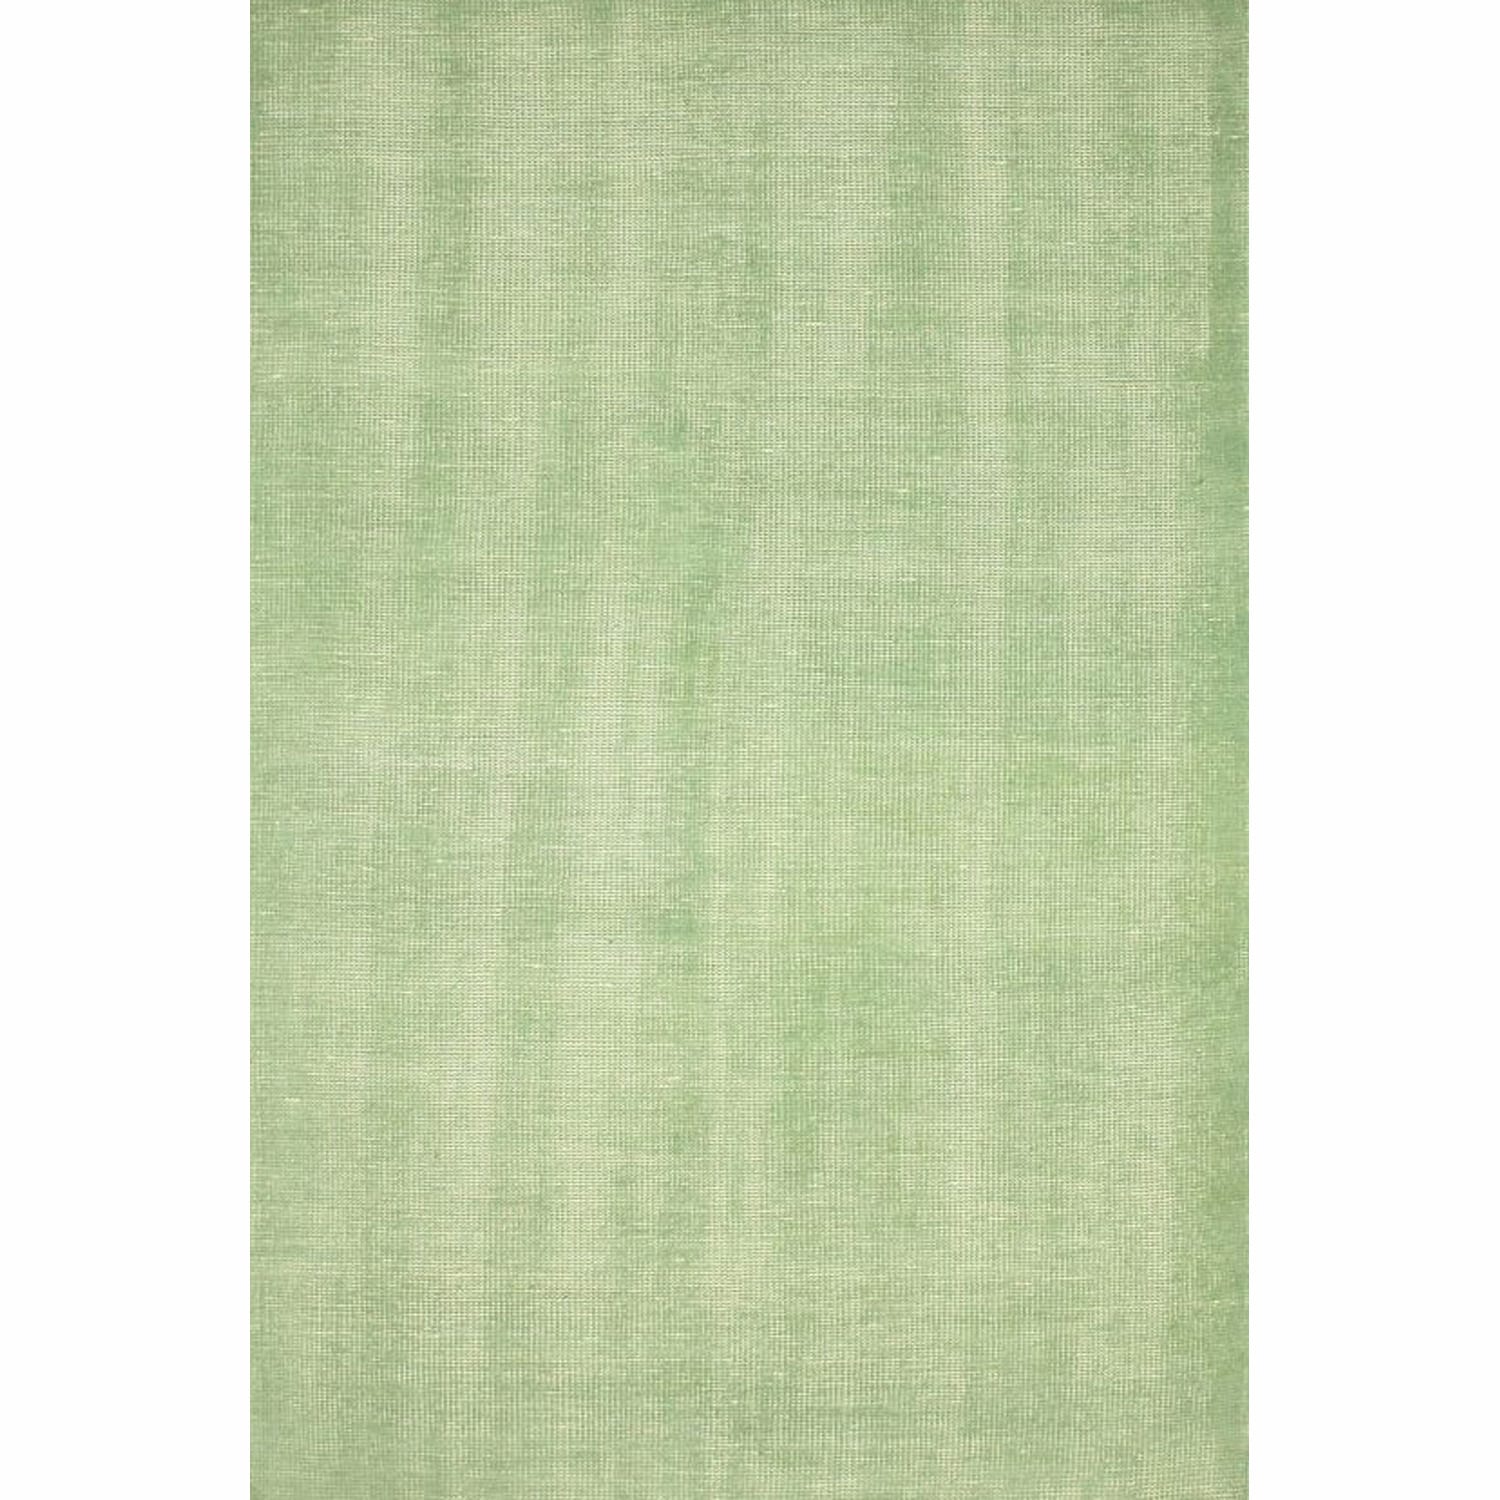 Nuloom Hand Knotted Wool Overdyed Solid Green Rug (7 6 X 9 6)